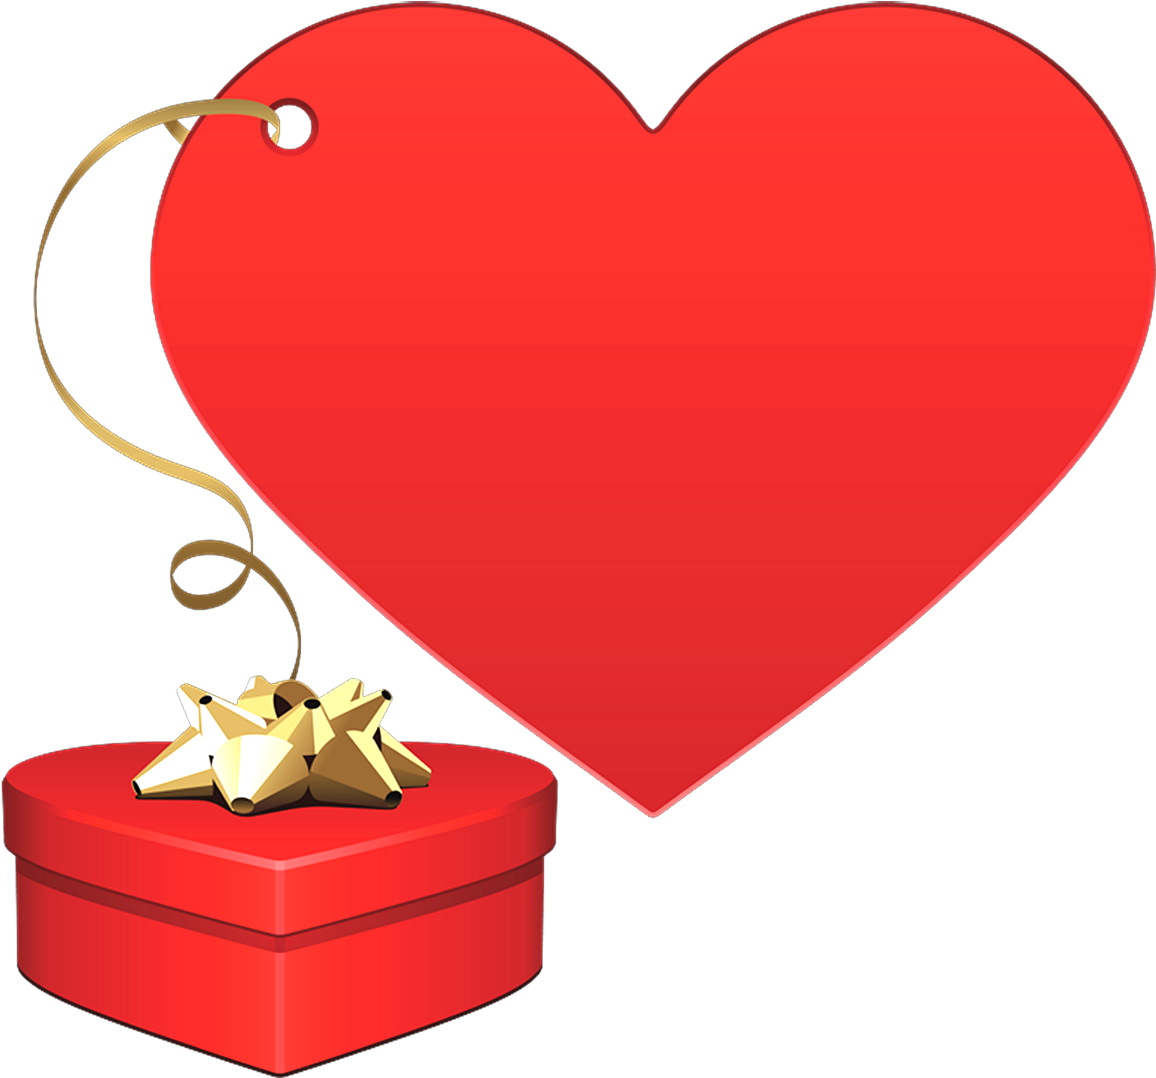 Box Surprise Heart Free Photo PNG Image